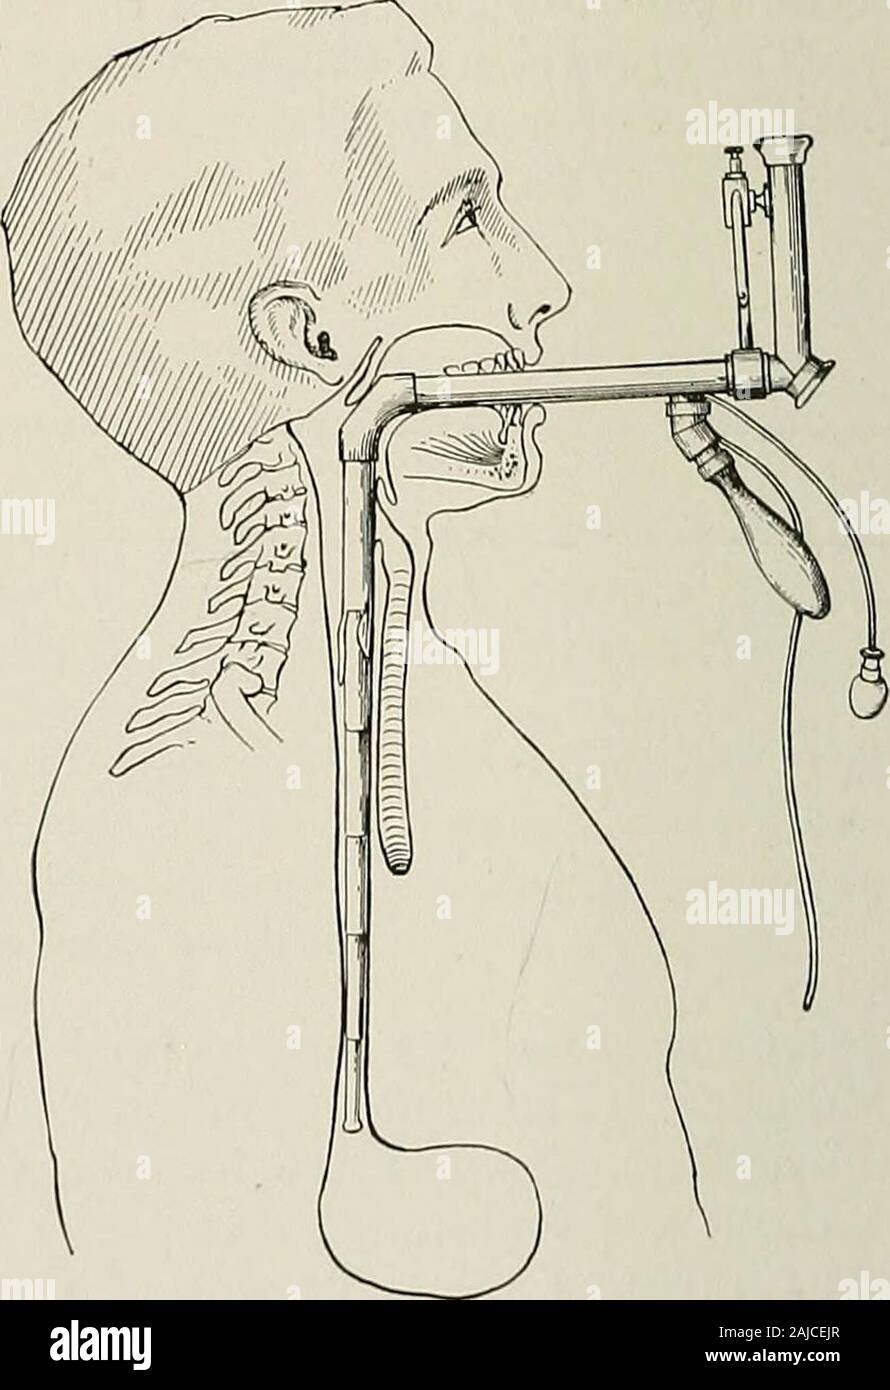 Surgical treatment; a practical treatise on the therapy of surgical diseases for the use of practitioners and students of surgery . Fig. 902.—Esophagoscope. The telescoping instrument of Lewisohn. Fig. 903.—Esophagoscope. Telescoping instrument released and tube extended to stomach. to slip a snare over an open safety pin and close it before attempting itsremoval. This has been successfully done. A magnet on the end of a rodmay be used to remove iron bodies. THE MOUTH Two peculiarities of the oral cavity are of moment in the treatment of itsinjuries and diseases: asepsis can not be attained; a Stock Photo